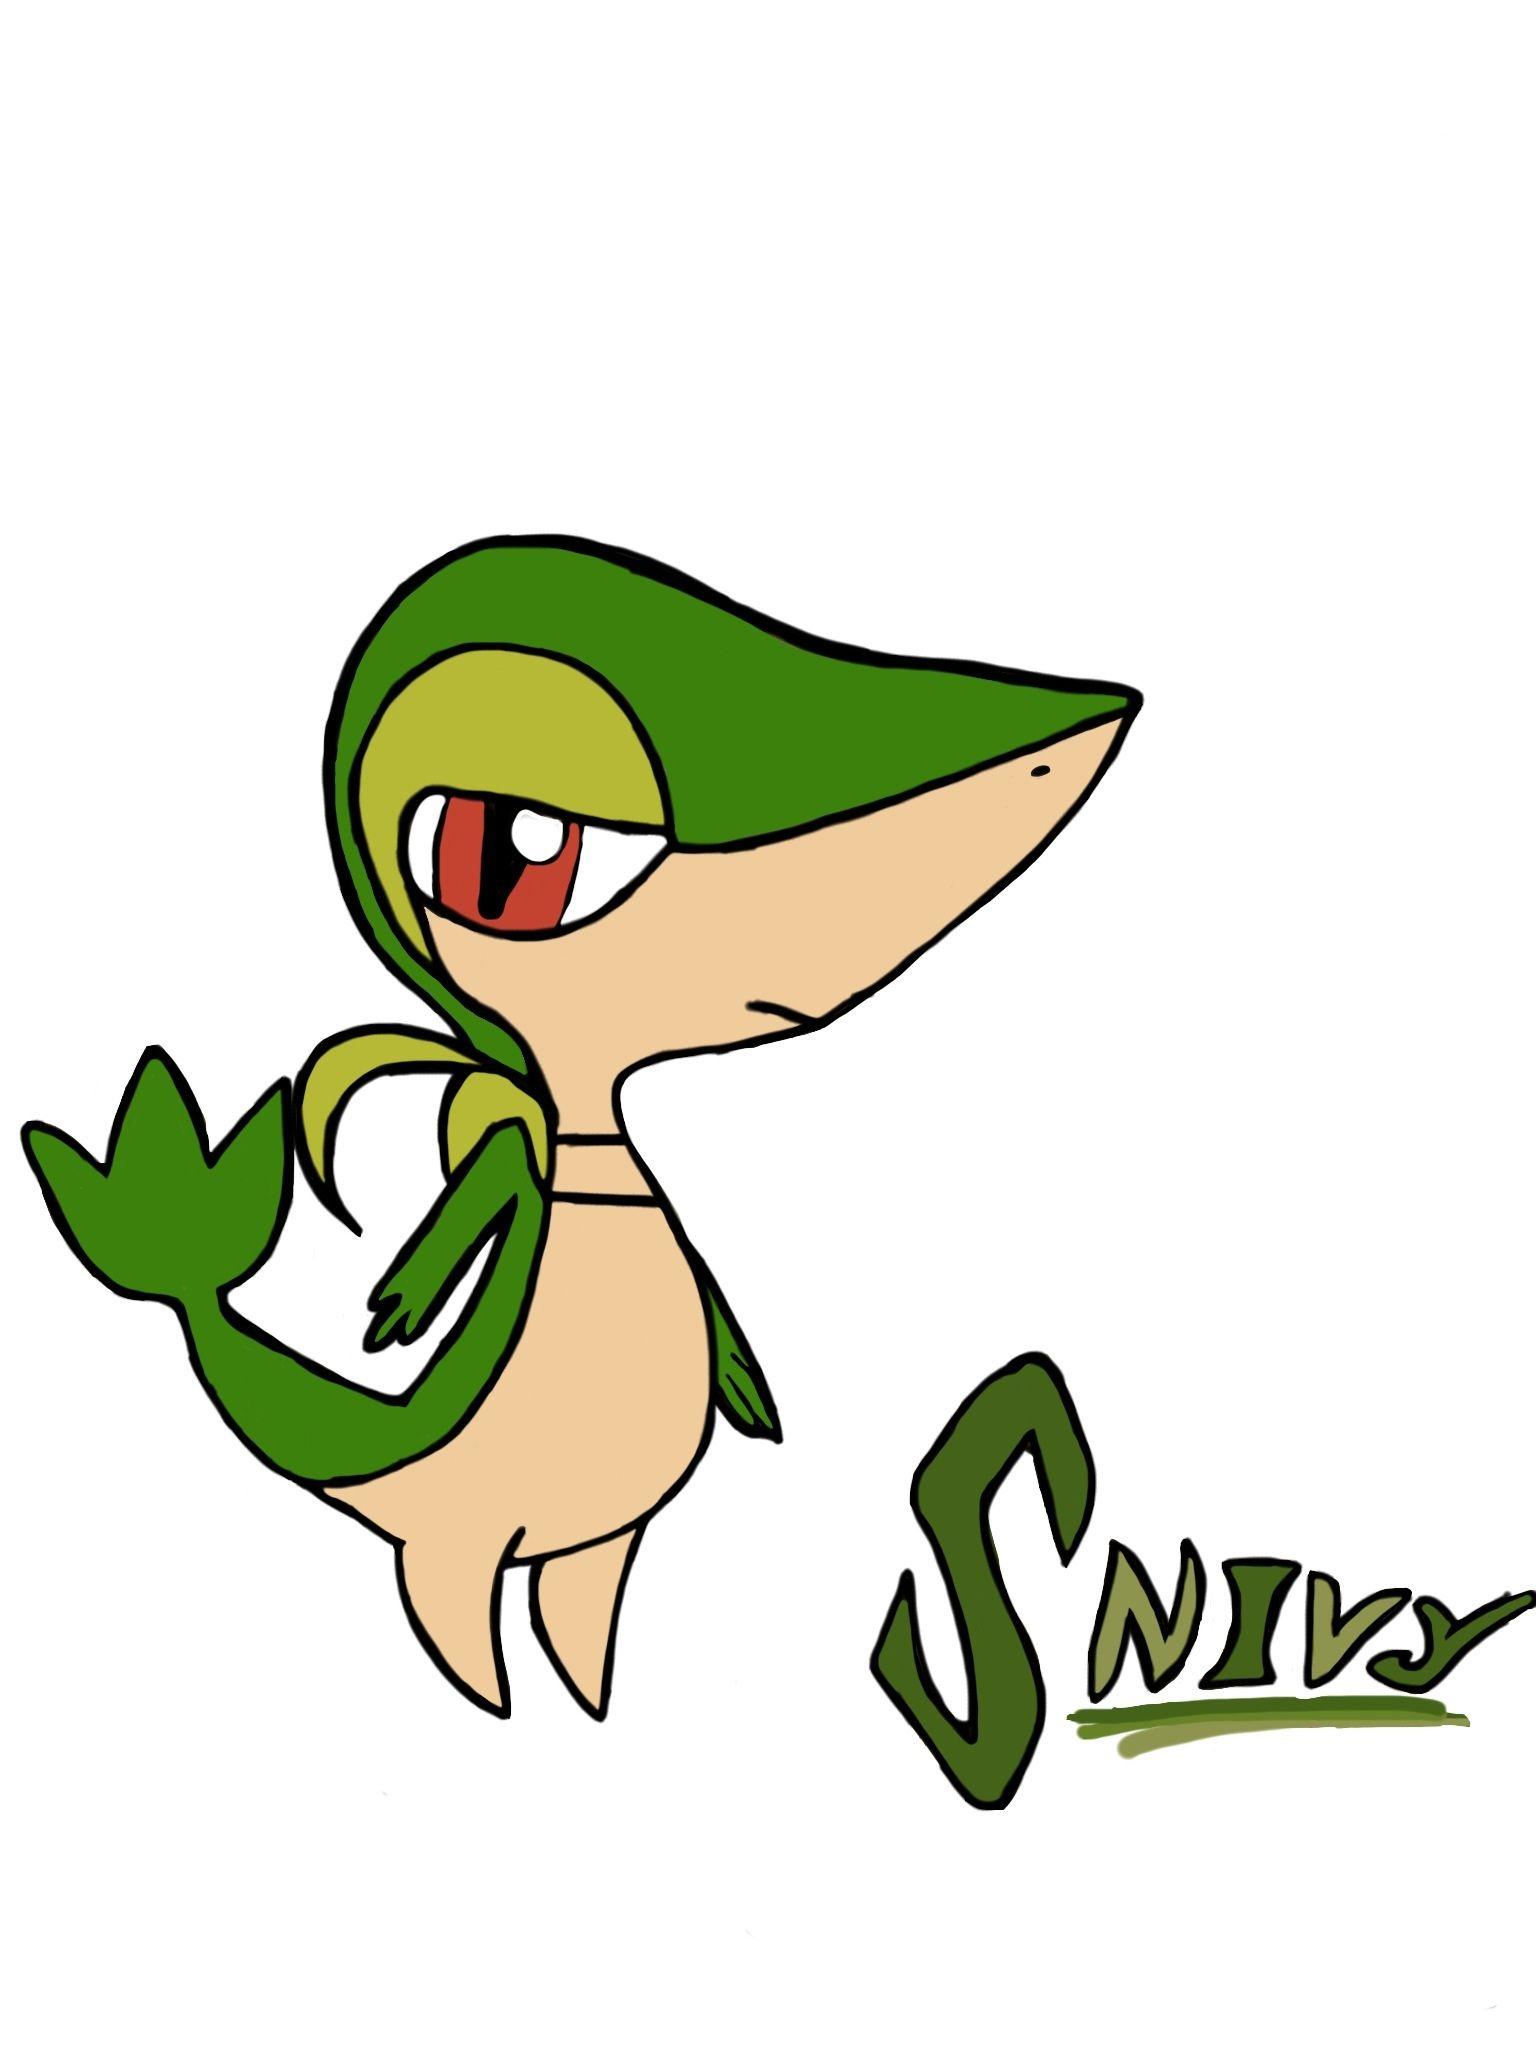 Snivy image Snivy HD wallpapers and backgrounds photos.